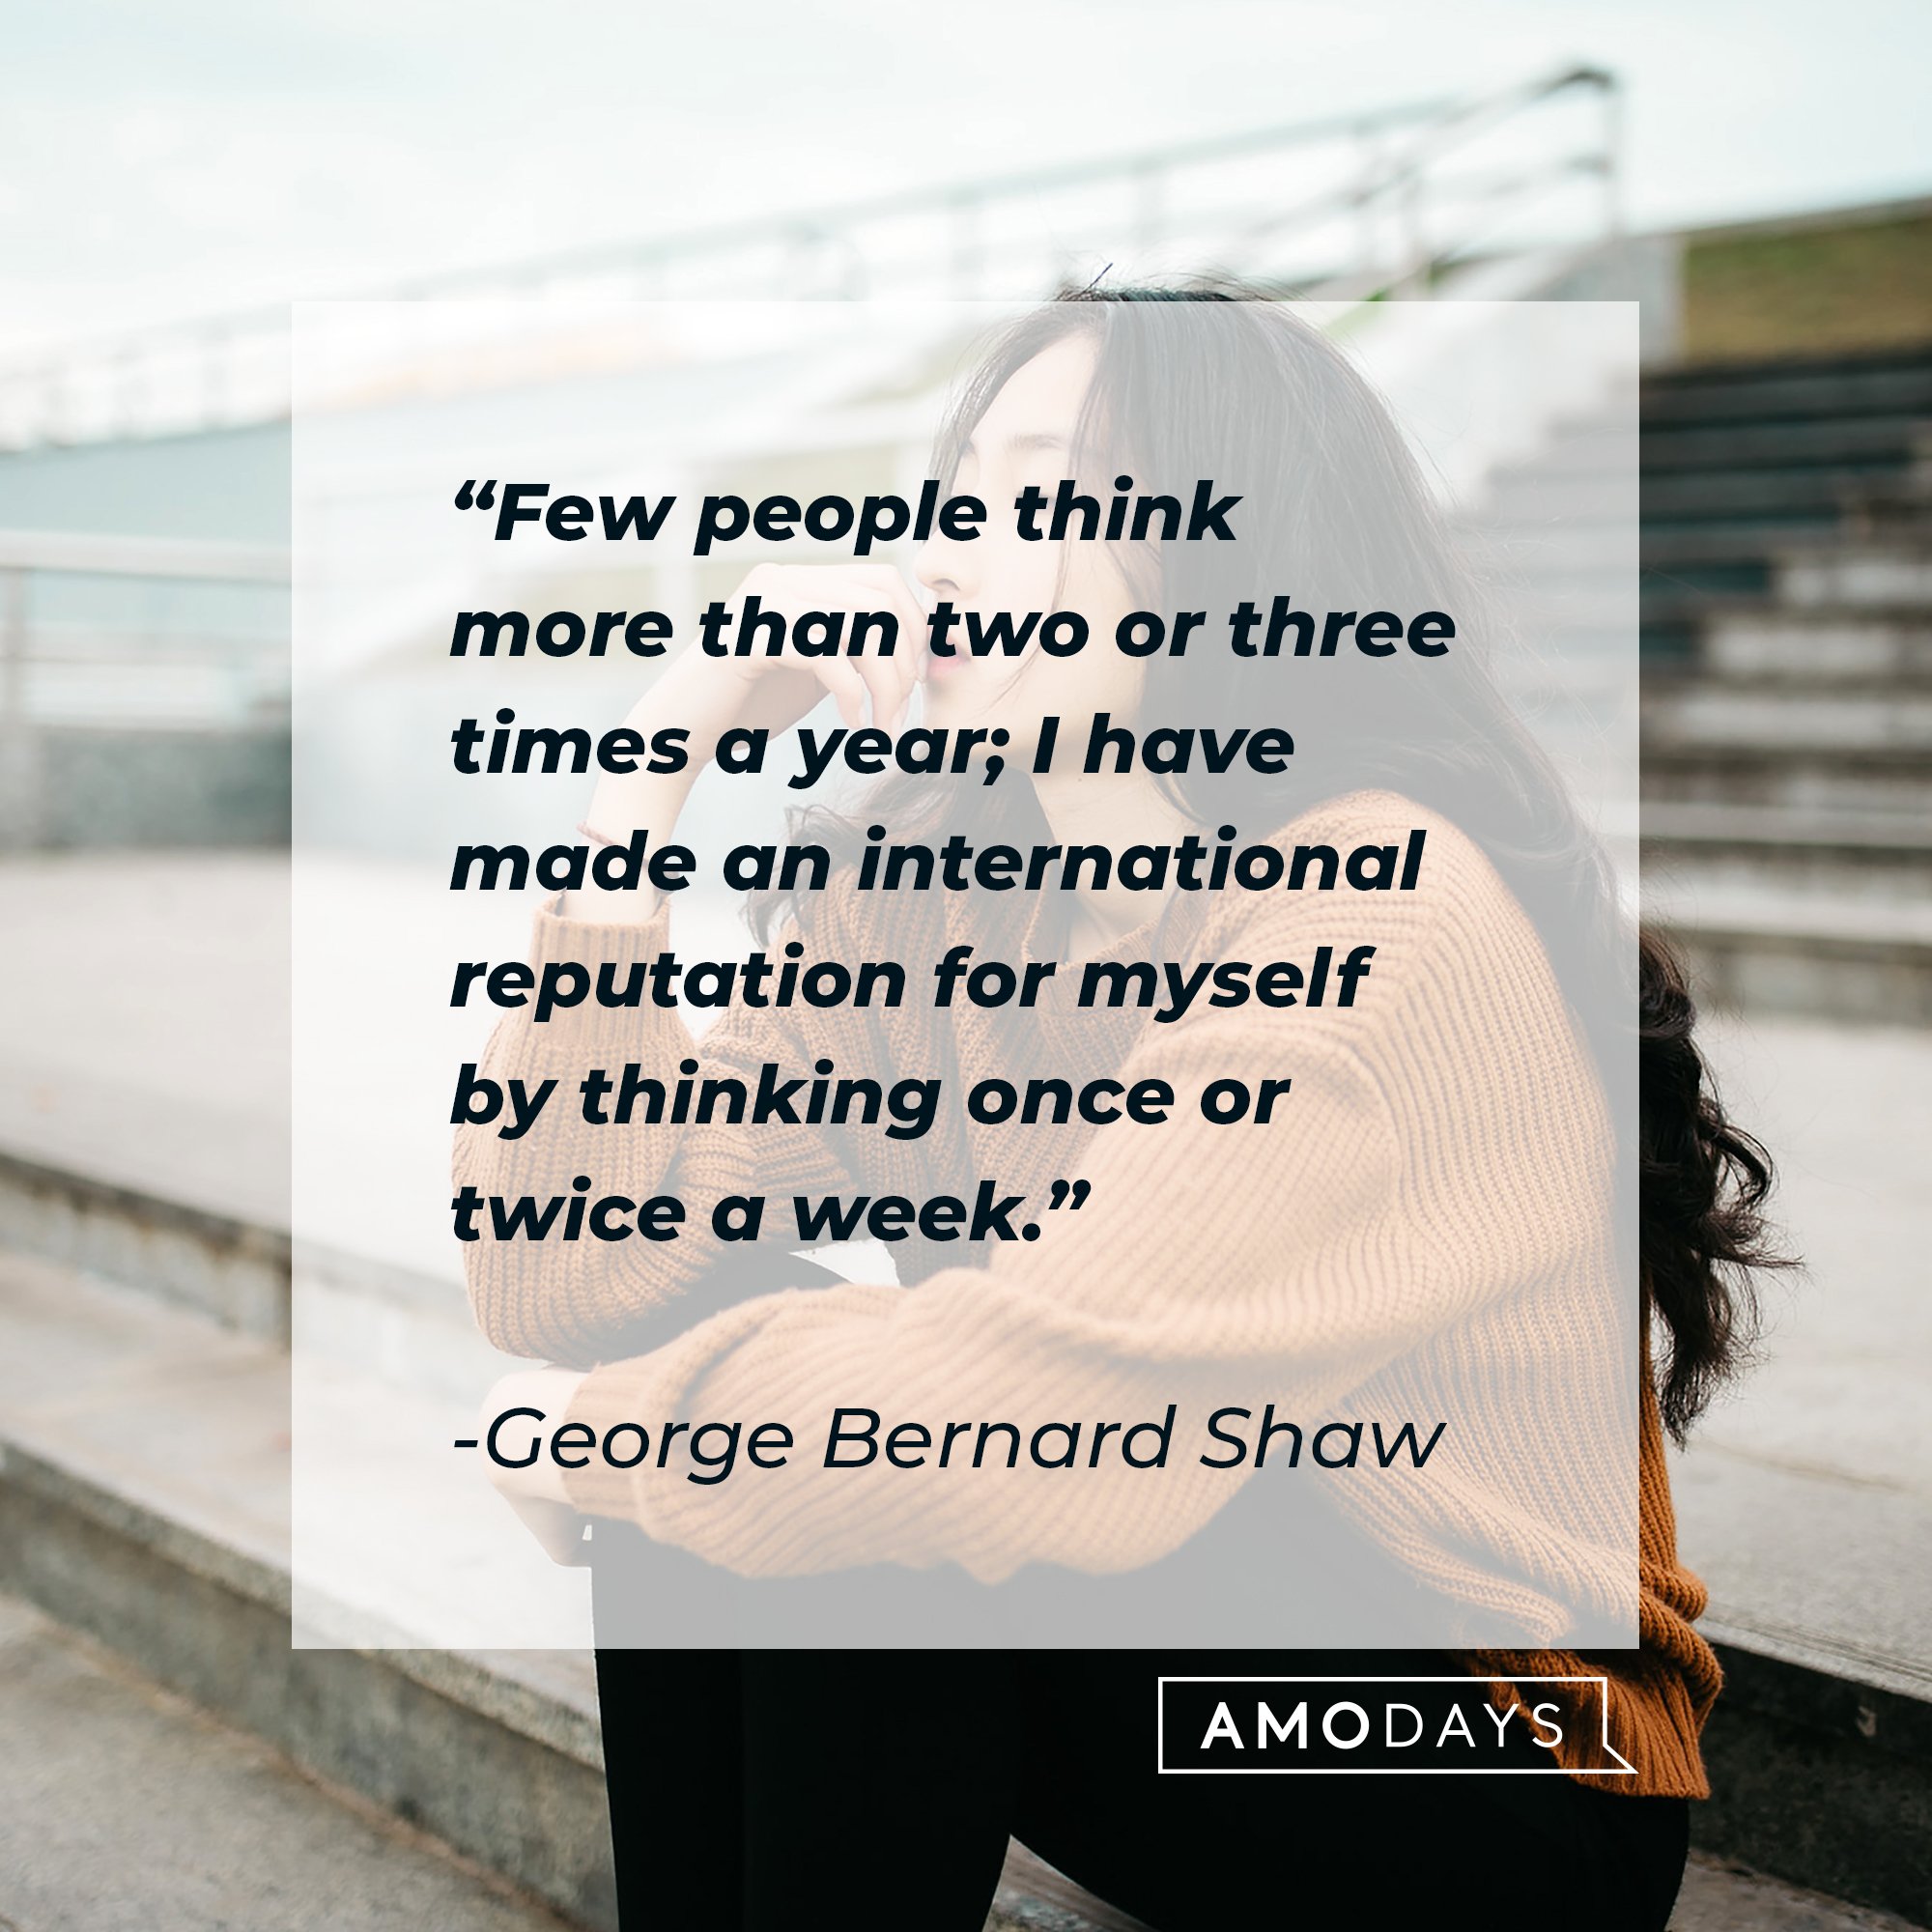 George Bernard Shaw’s quote: "Few people think more than two or three times a year; I have made an international reputation for myself by thinking once or twice a week." | Image: AmoDays